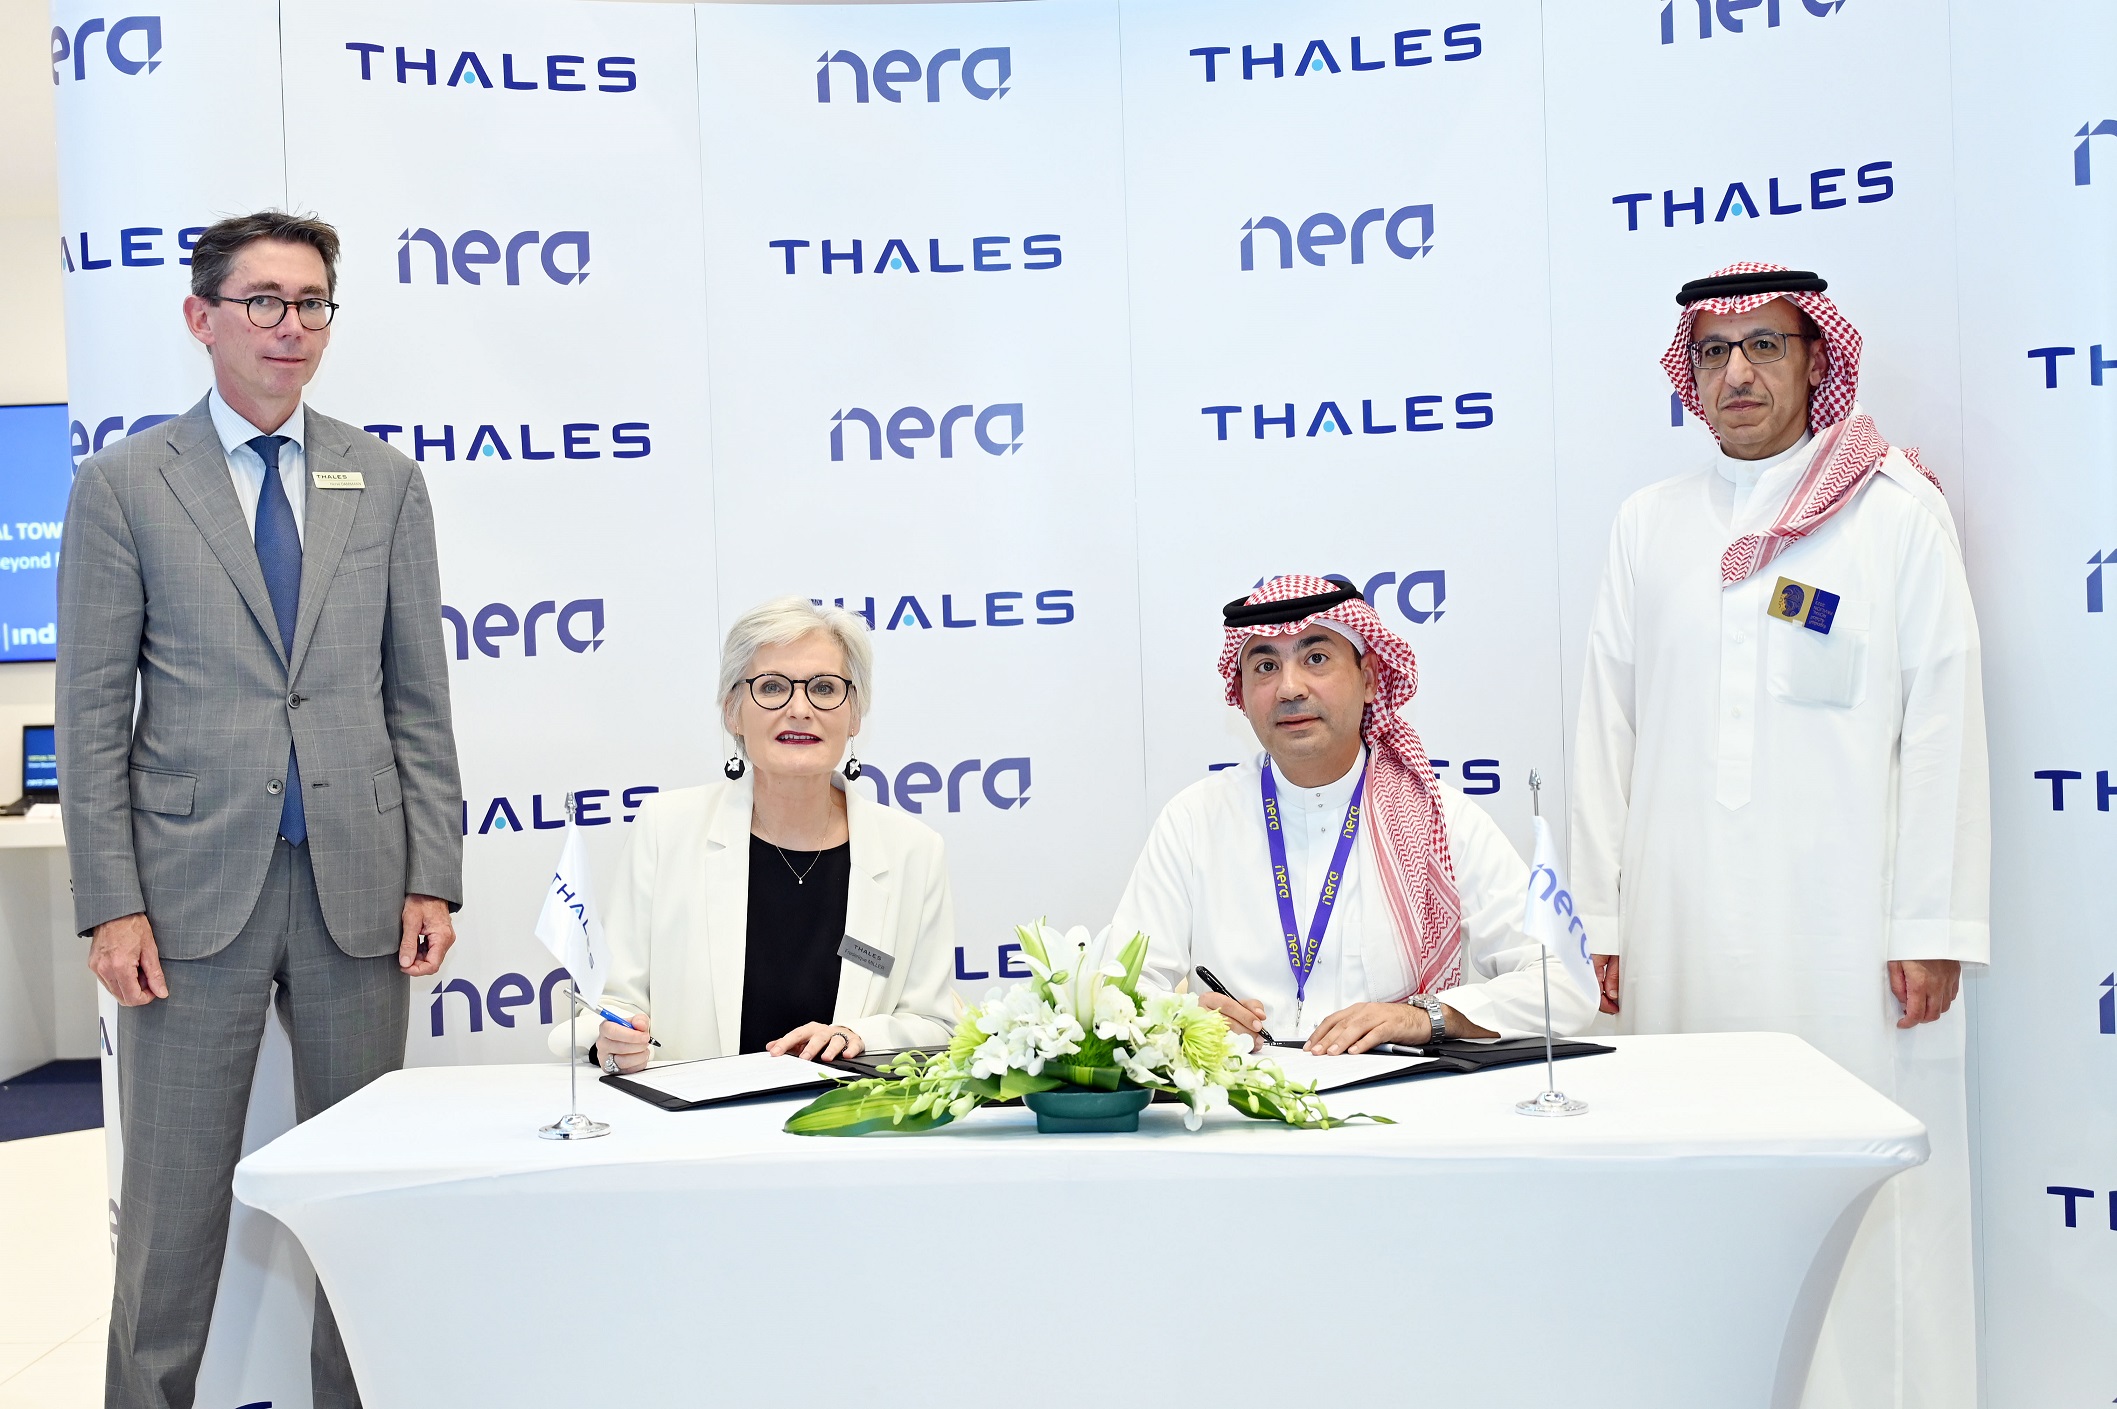 NERA and Thales signed a business partnership agreement for the Maintenance Efficiency Manager (MEM) digital support services platform at Dubai Airshow